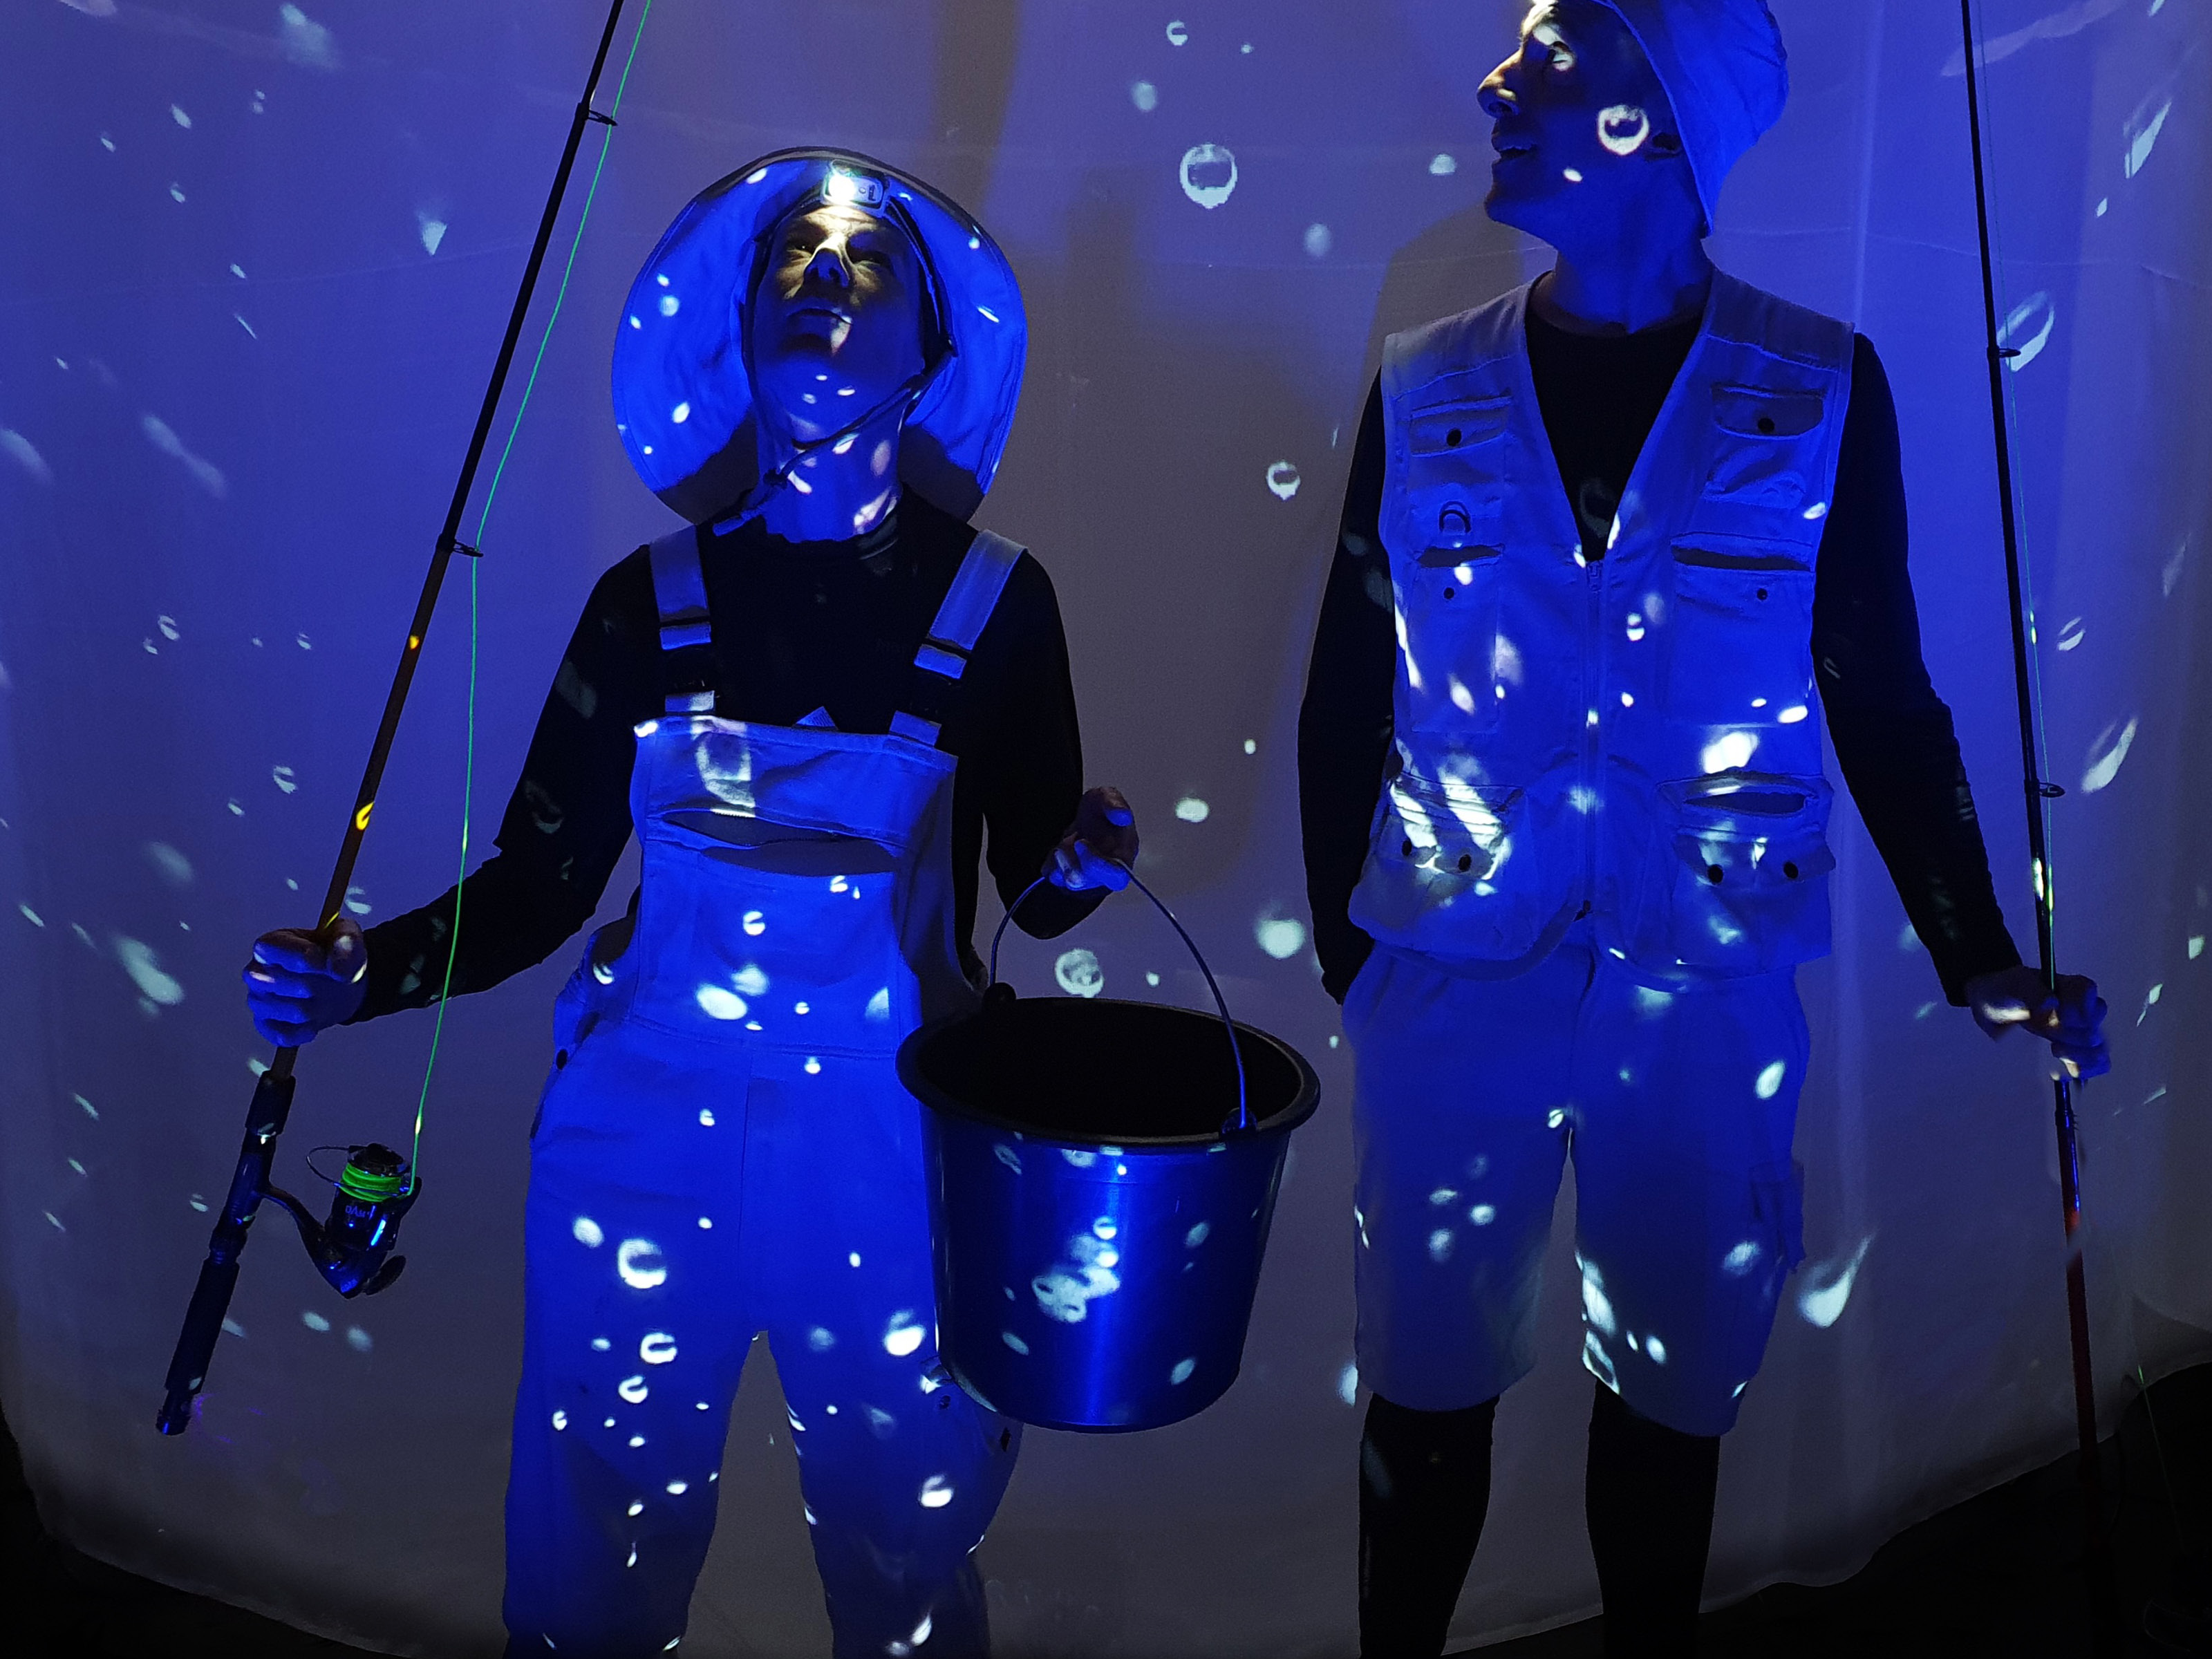 Two people in fishing outfits stand in front of a blue lit screen with bubbles and hold two fishing rods and a metal bucket in their hands.